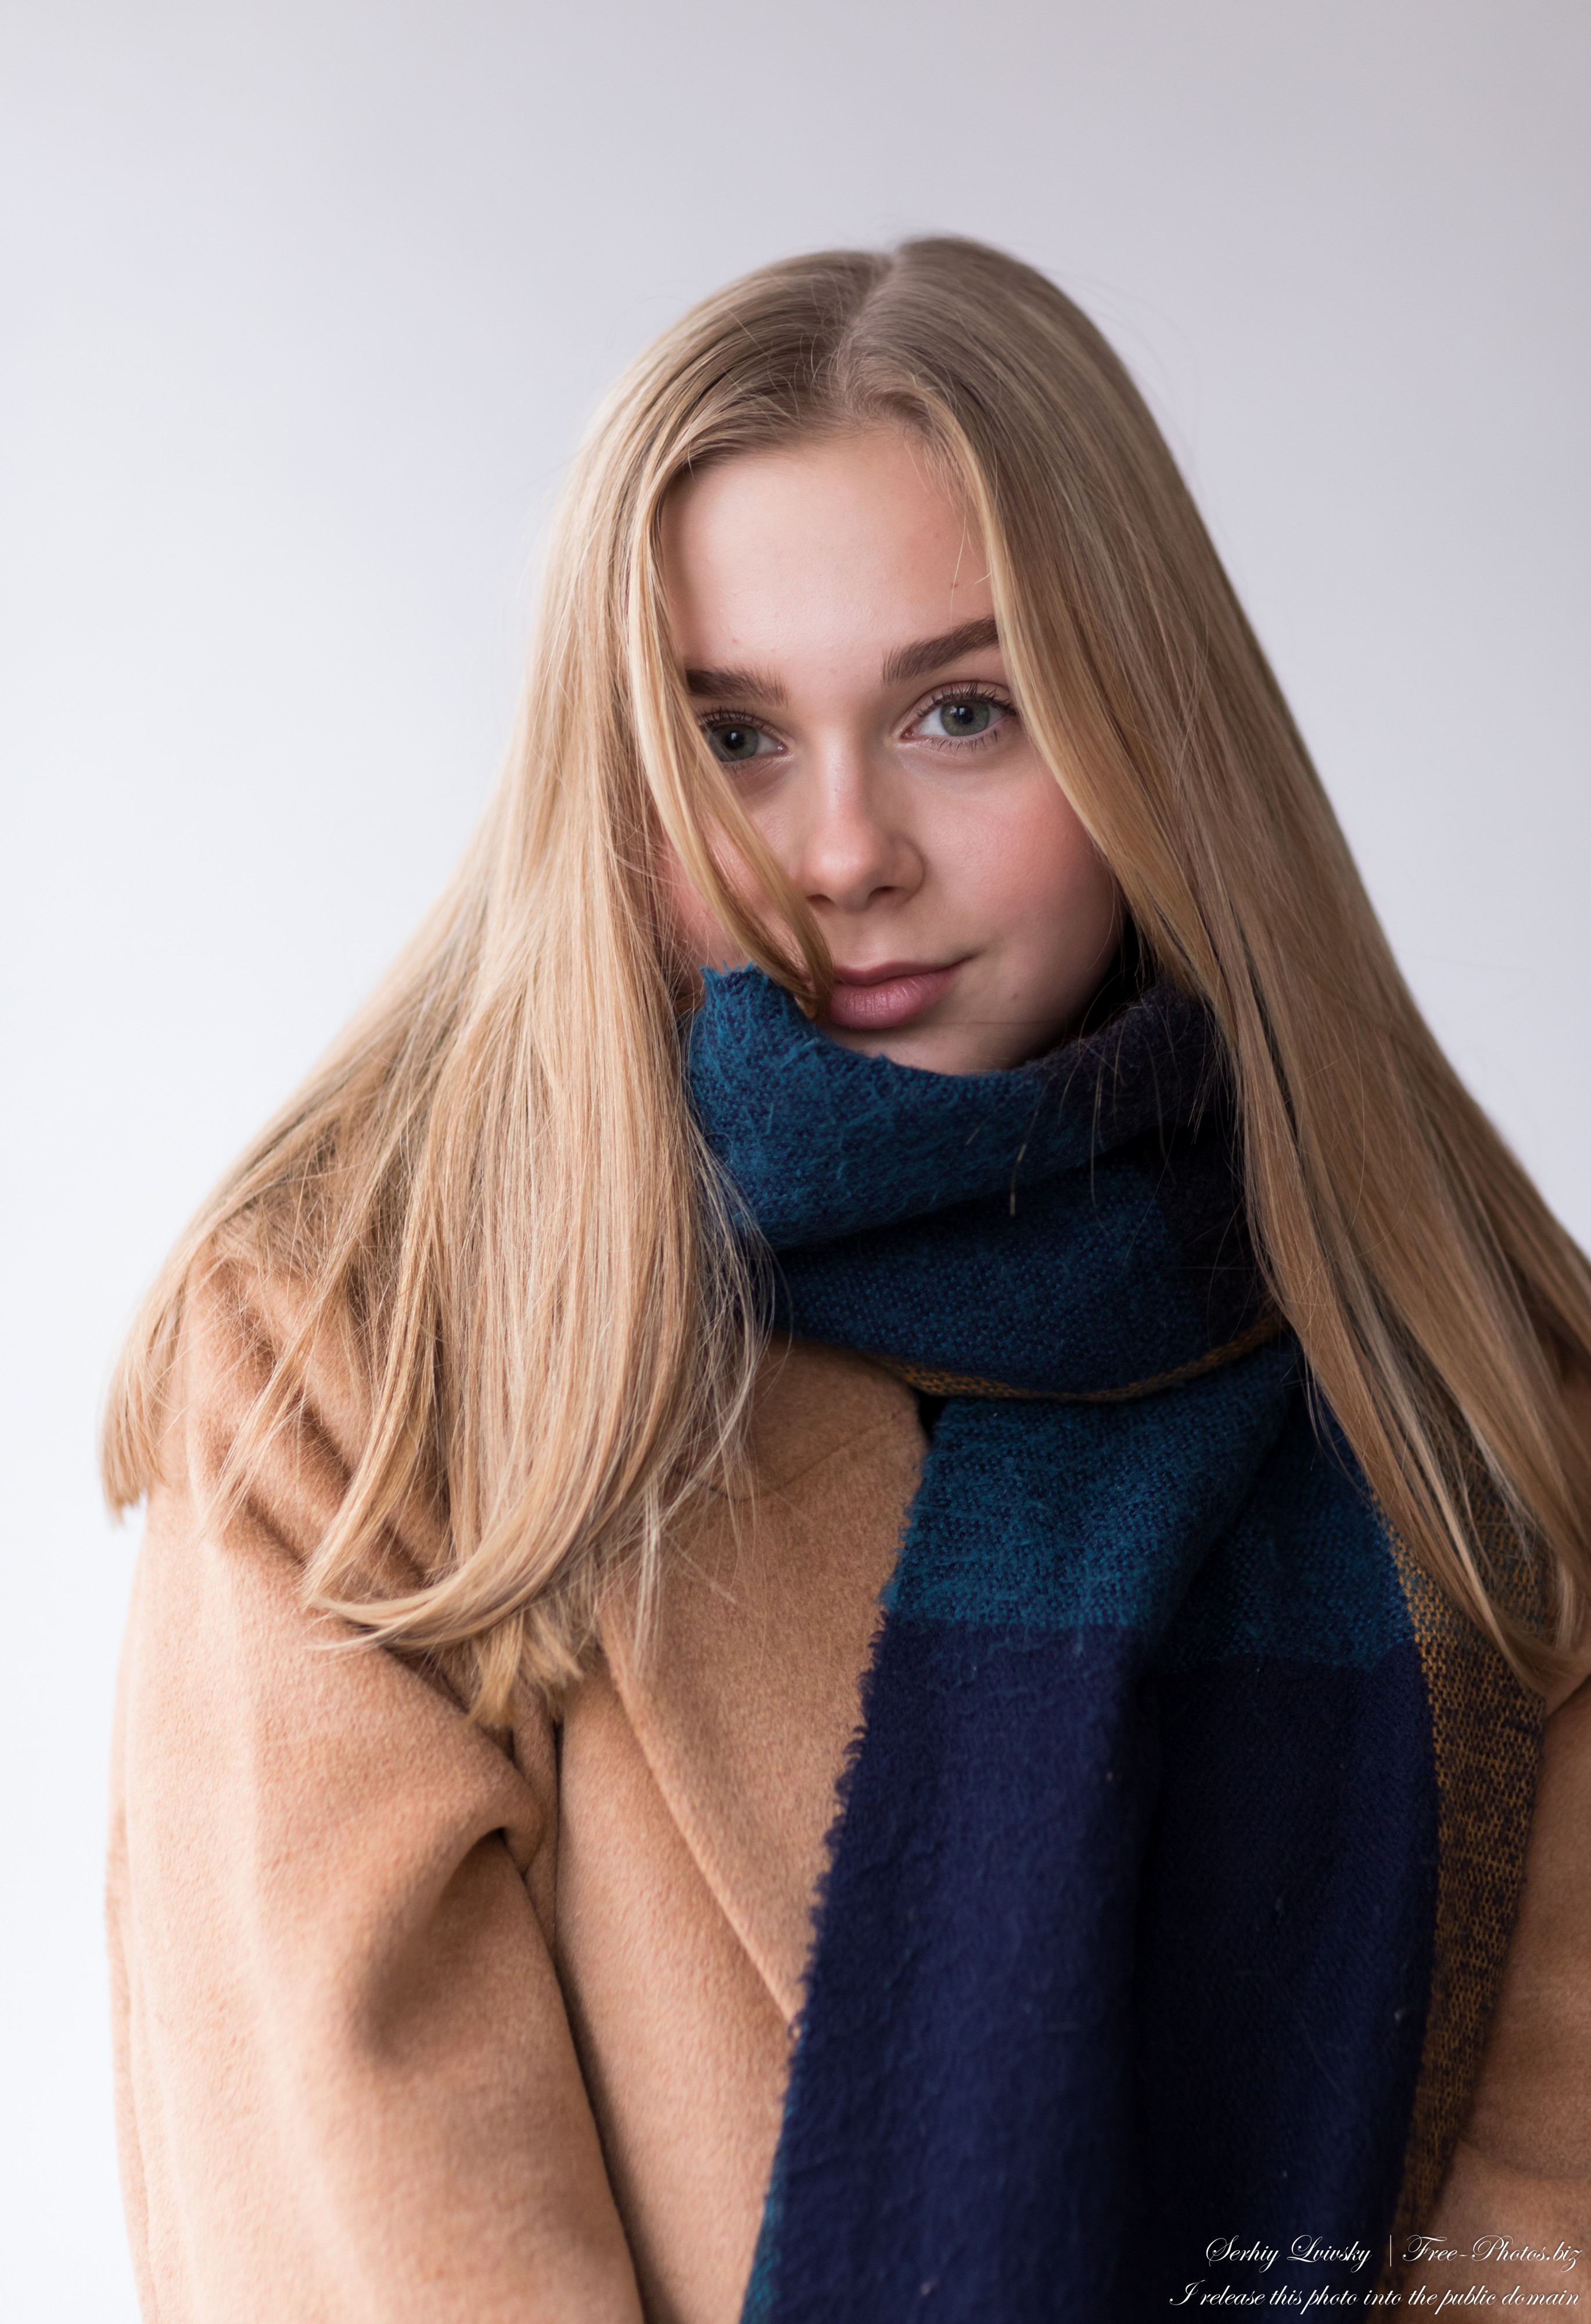 Emilia - a 15-year-old natural blonde Catholic girl photographed in November 2020 by Serhiy Lvivsky, picture 11